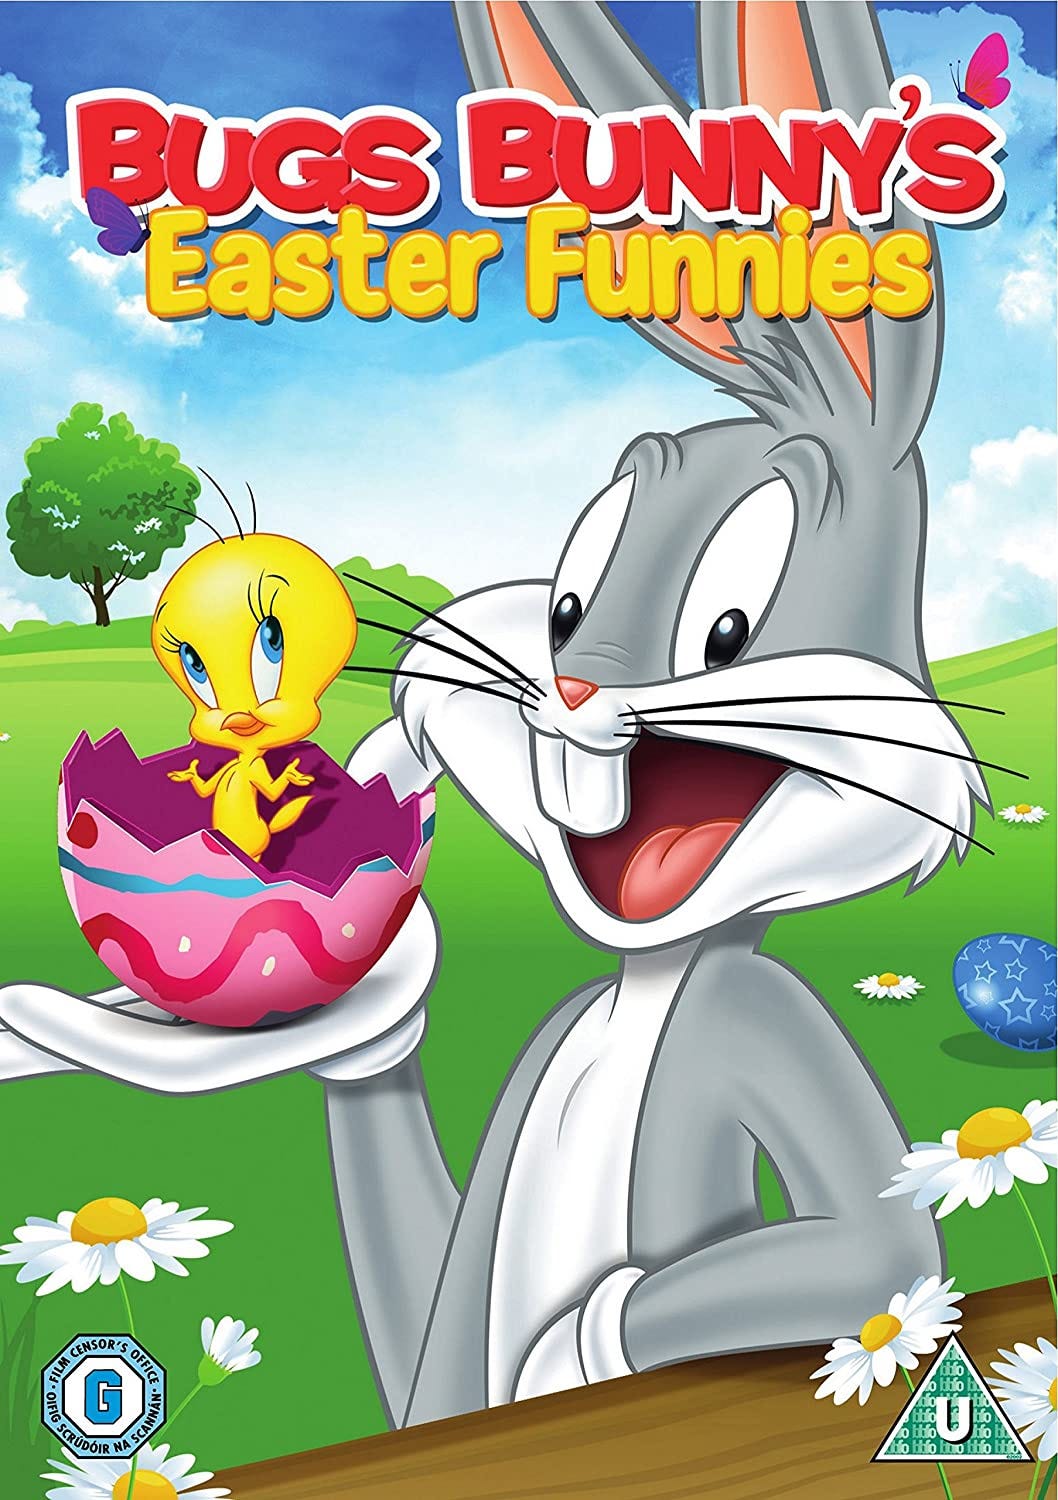 Bugs Bunny's Easter Funnies [Import anglais]